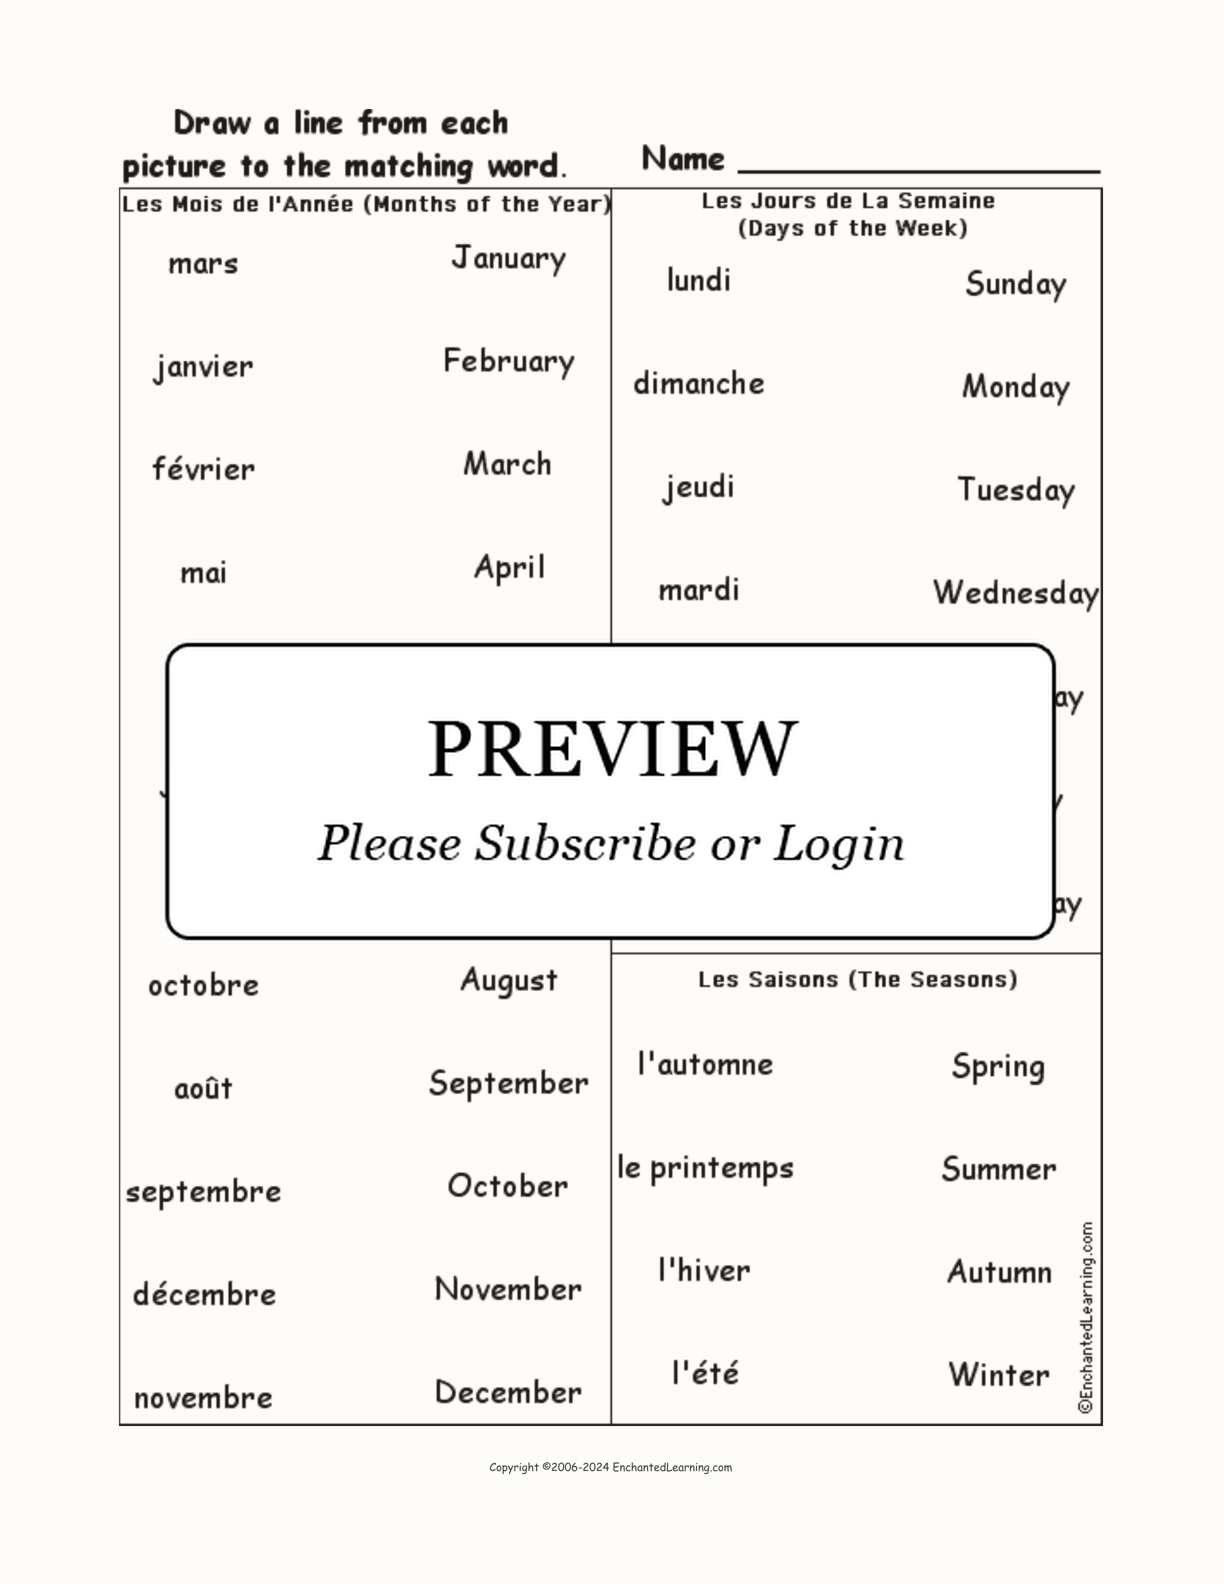 Match the French Calendar Words to the English Words interactive worksheet page 1